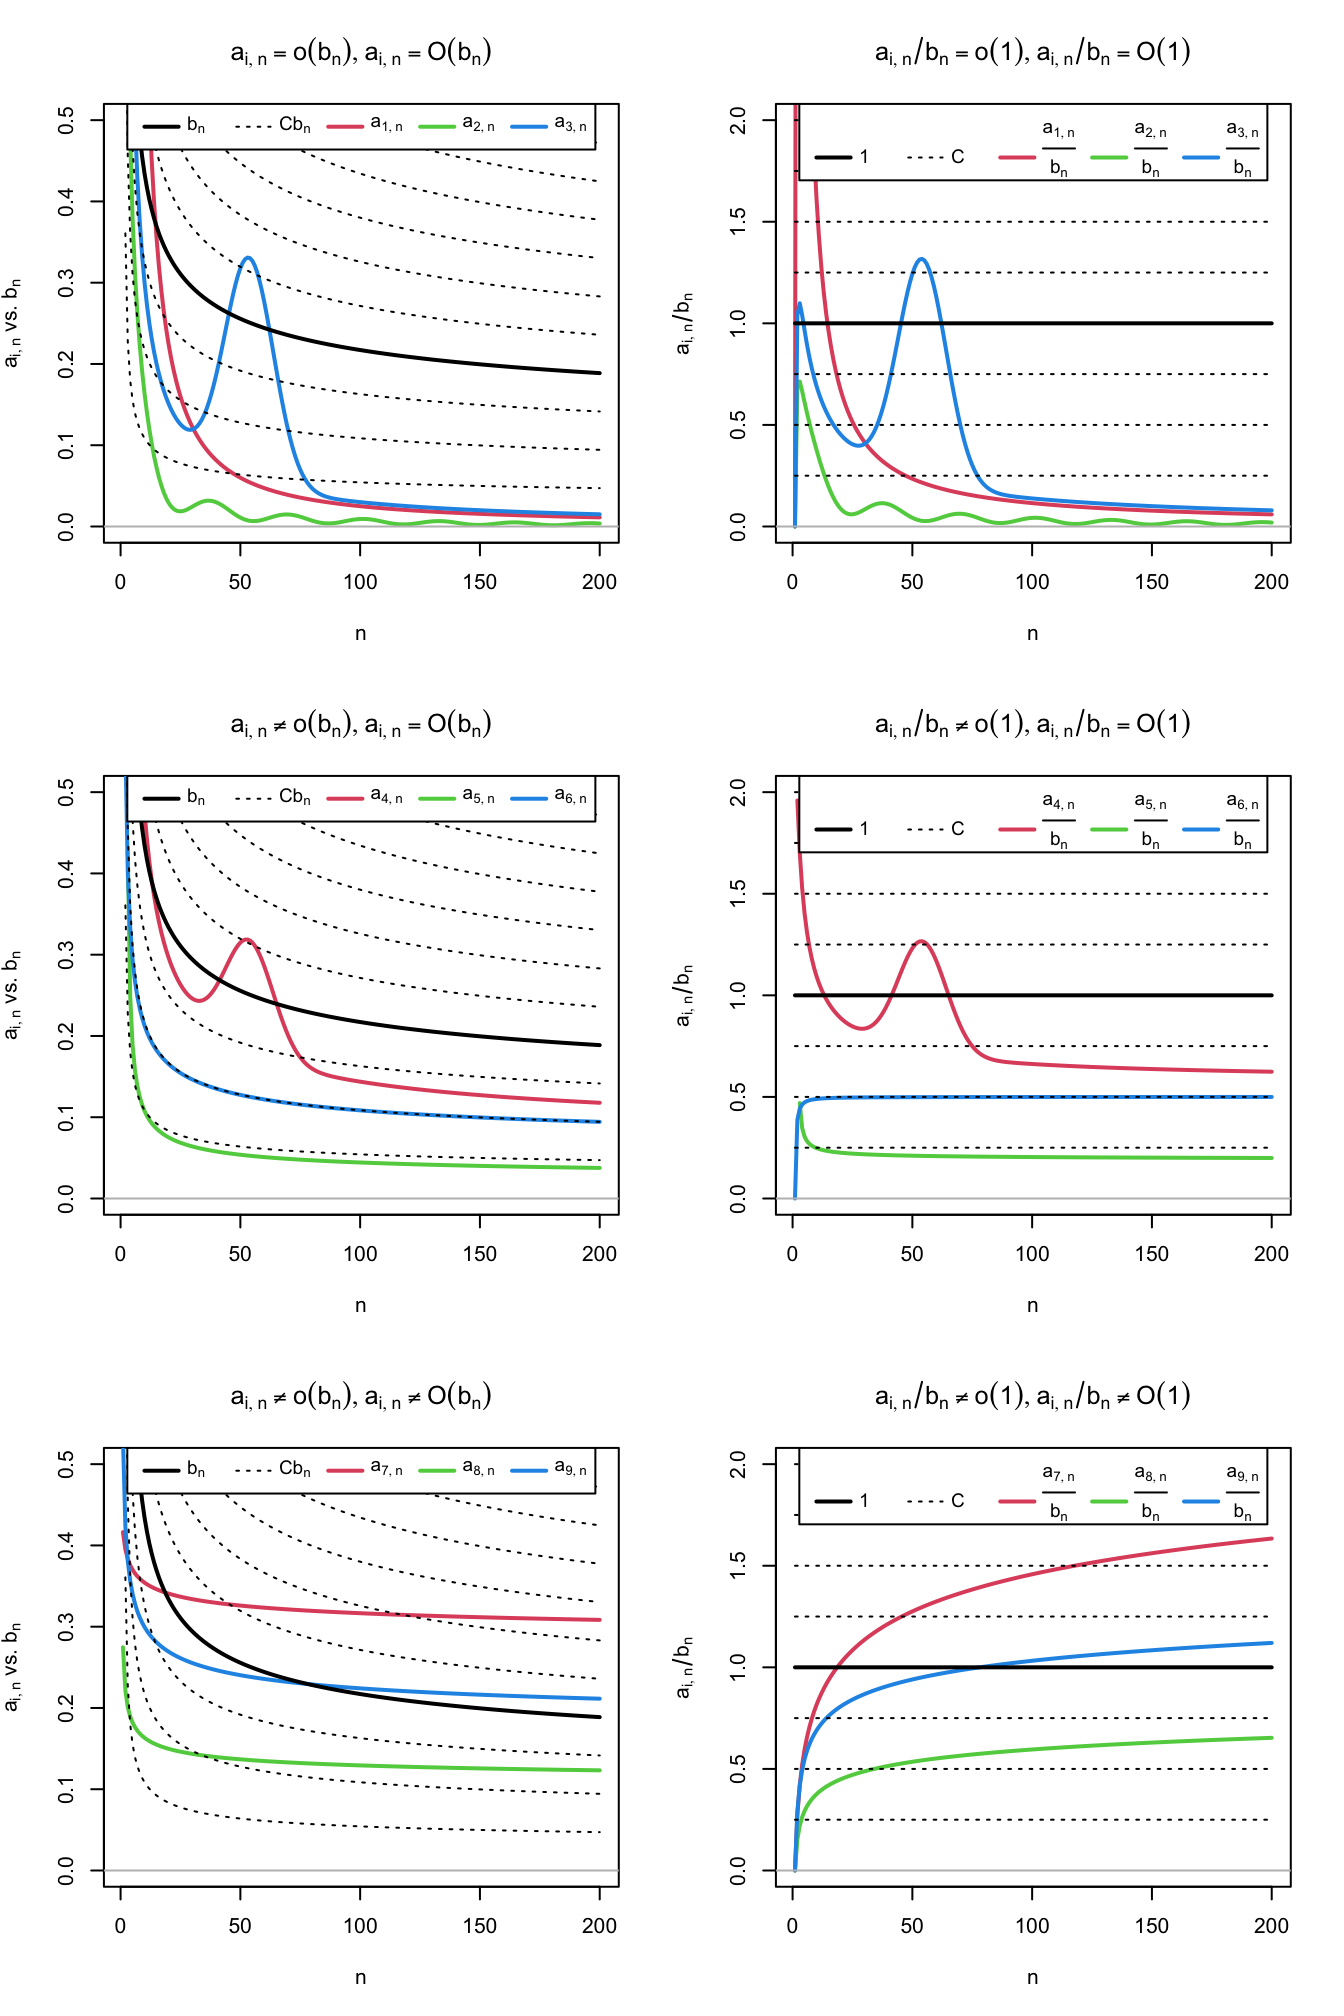 Differences and similarities between little-\(o\) and big-\(O,\) illustrated for the dominating sequence \(b_n=1/\log(n)\) (black solid curve) and sequences \(a_{i,n},\) \(j=1,\ldots,9\) (colored curves). The dashed lines represent the sequences \(Cb_n,\) for a grid of constants \(C.\) The plots on the left column compare \(a_{i,n}\) against \(b_n,\) whereas the right column plots show the equivalent view in terms of the ratios \(a_{i,n}/b_n\) (recall iii in Proposition 1.7). Sequences \(a_{1,n}=2 / n + 50 / n^2,\) \(a_{2,n}=(\sin(n/5) + 2) / n^{5/4},\) and \(a_{3,n}=3(1 + 5 \exp(-(n - 55.5)^2 / 200)) / n\) are \(o(b_n)\) (hence also \(O(b_n)\)). Sequences \(a_{4,n}=(2\log_{10}(n)((n + 3) / (2n)))^{-1} + a_{3,n}/2,\) \(a_{5,n}=(4\log_2(n/2))^{-1},\) and \(a_{6,n}=(\log(n^2 + n))^{-1}\) are \(O(b_n),\) but not \(o(b_n).\) Finally, sequences \(a_{7,n}=\log(5n + 3)^{-1/4}/2,\) \(a_{8,n}=(4\log(\log(10n + 2)))^{-1},\) and \(a_{9,n}=(2\log(\log(n^2 + 10n + 2)))^{-1}\) are not \(O(b_n)\) (hence neither \(o(b_n)\)).